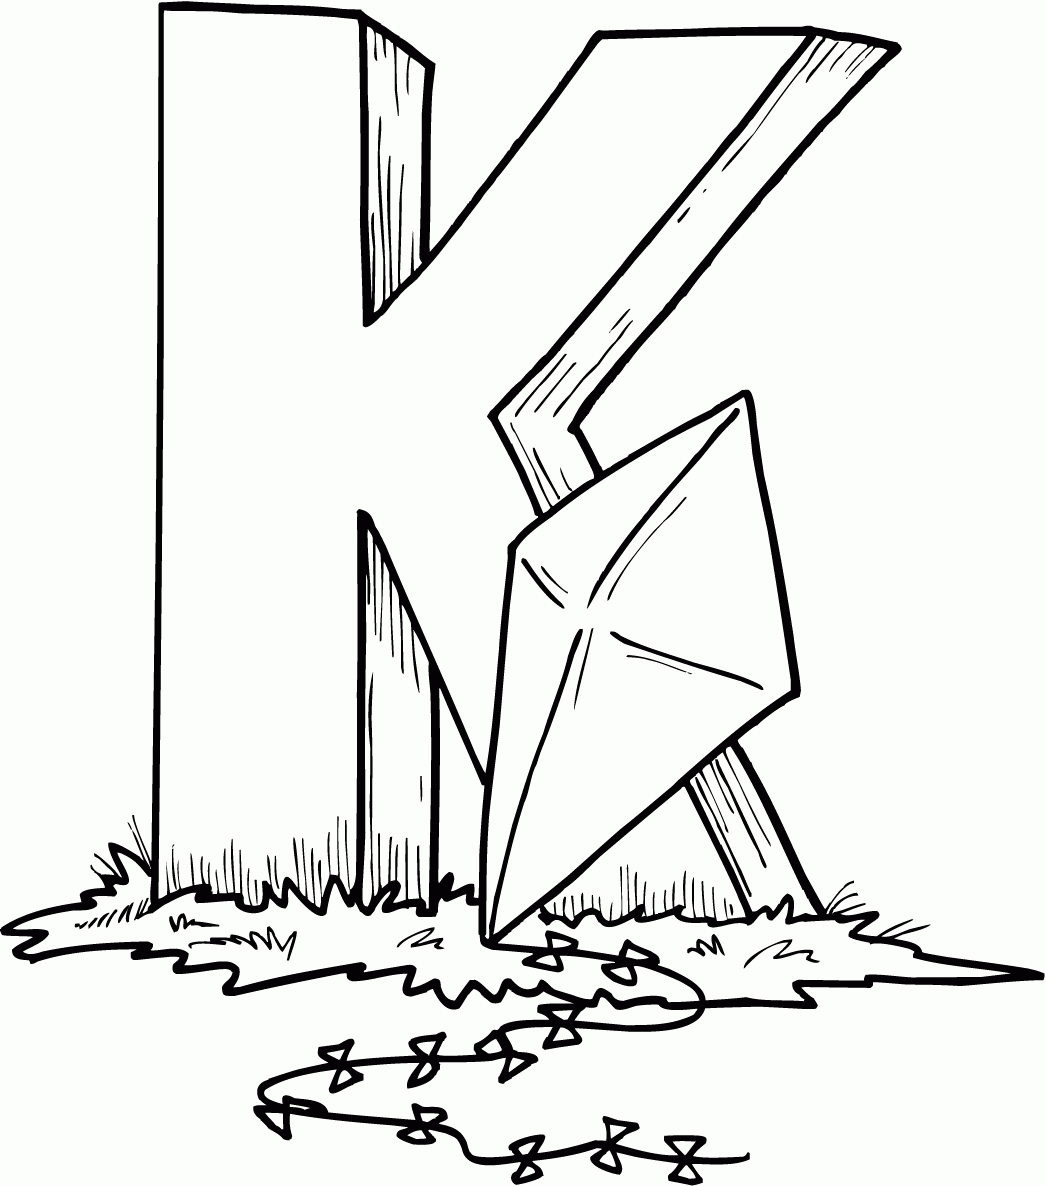 Exercise Free Coloring Pages Of Kite Preschool - Widetheme